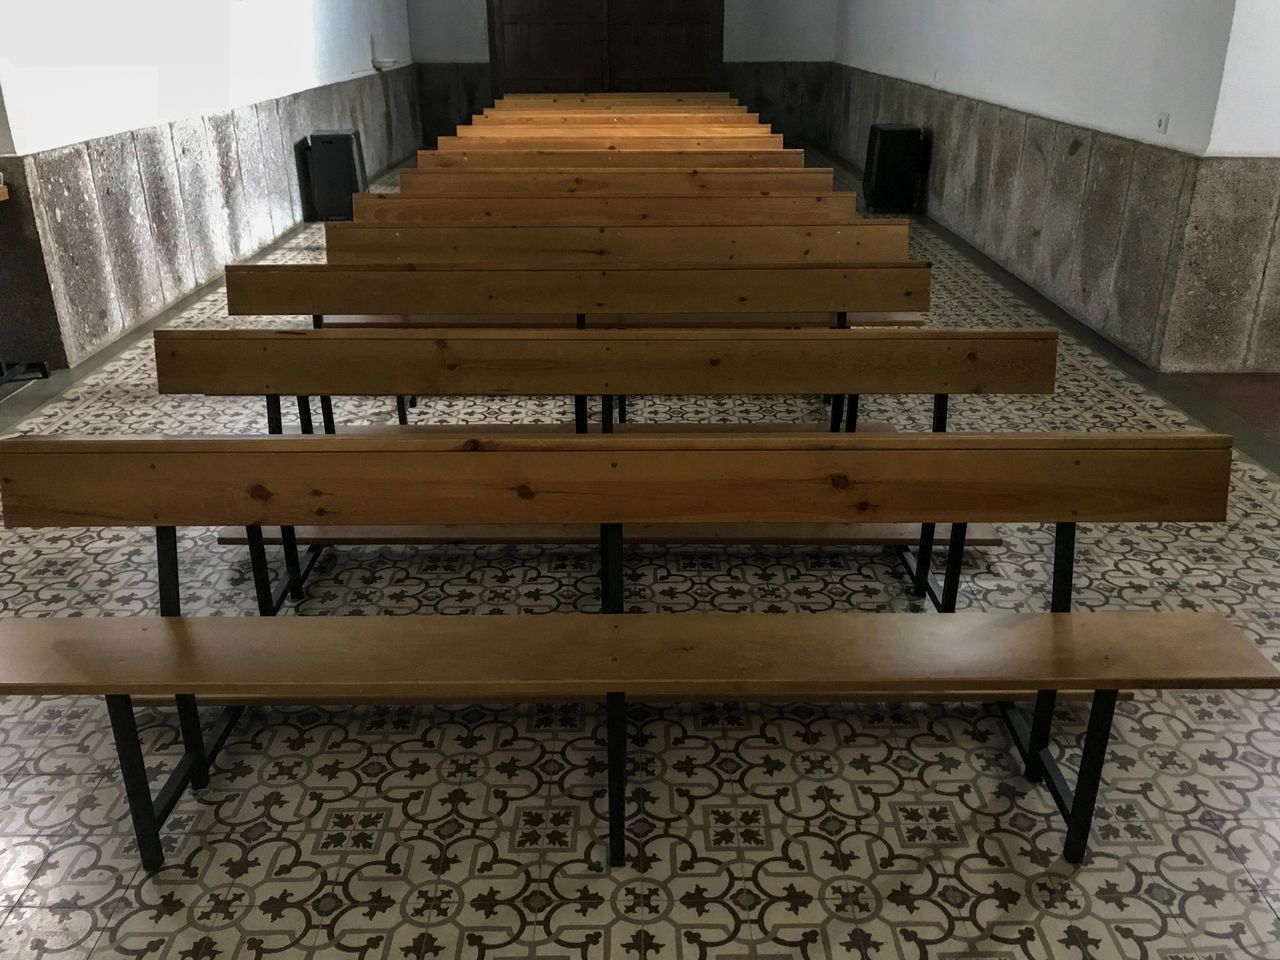 EMPTY BENCH ON TABLE AGAINST WALL